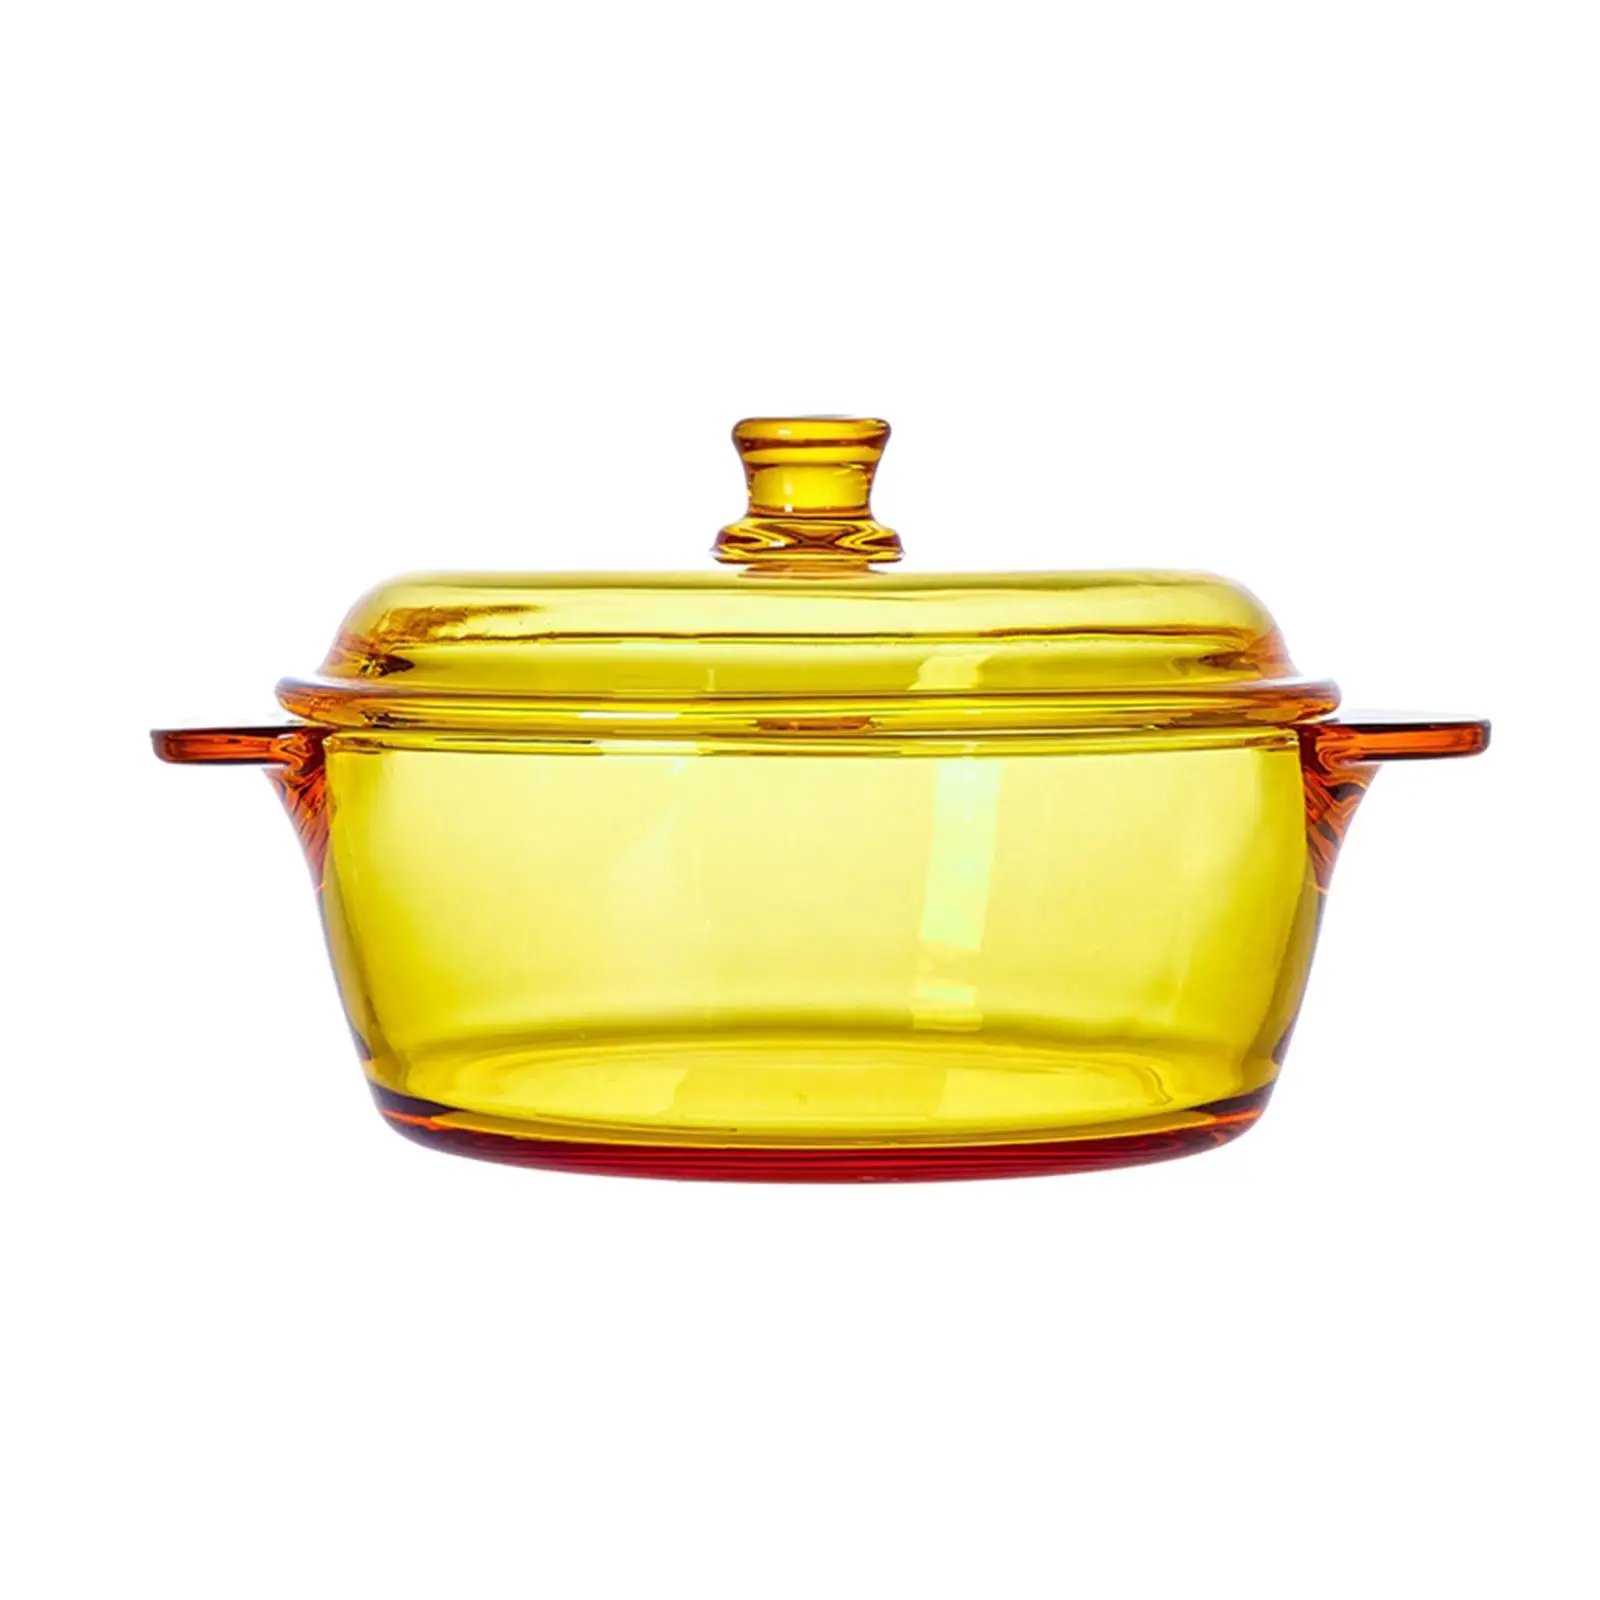 Glass Casserole Dish Portable Fridge Mixing Bowl with Lid Handle Heat Resistant Noodles Bowl for Rice Snack Sauces